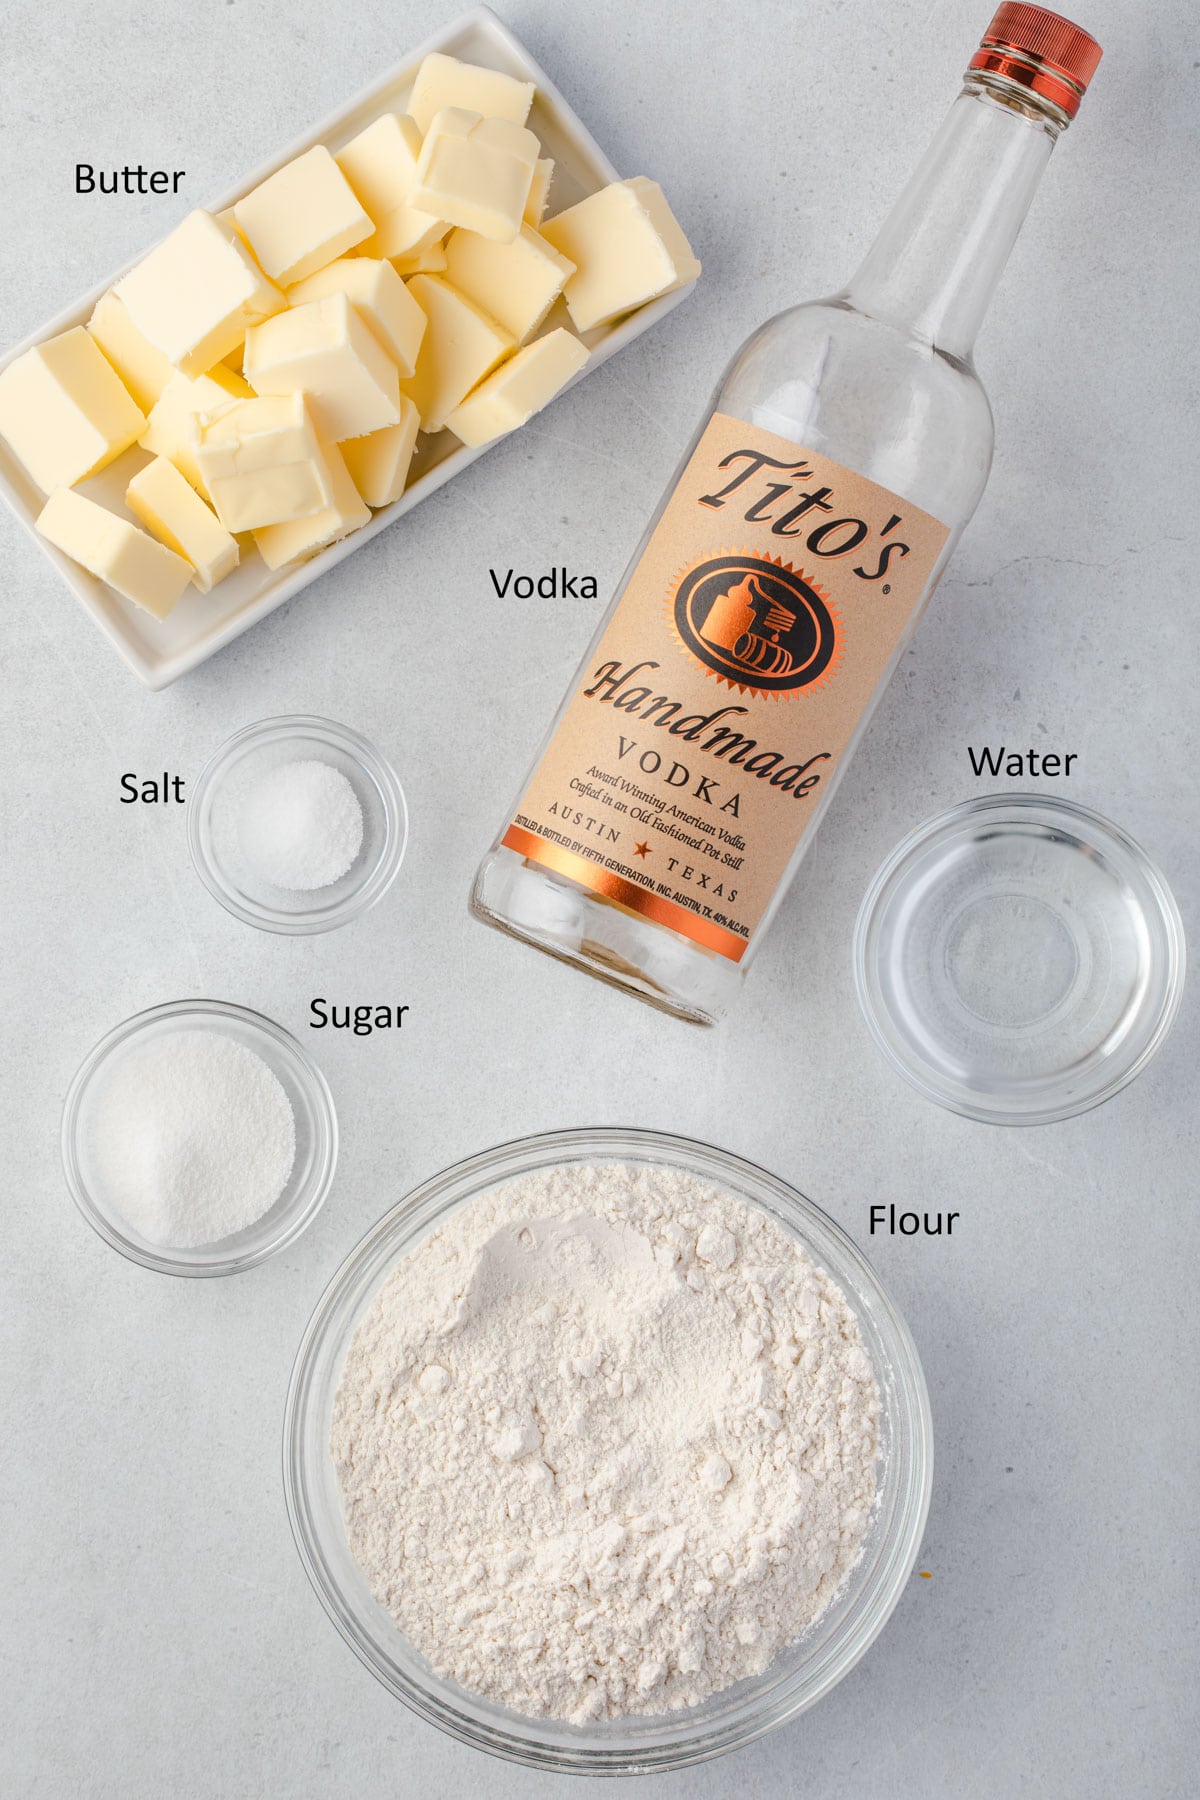 Labeled ingredients for butter vodka pie crust.